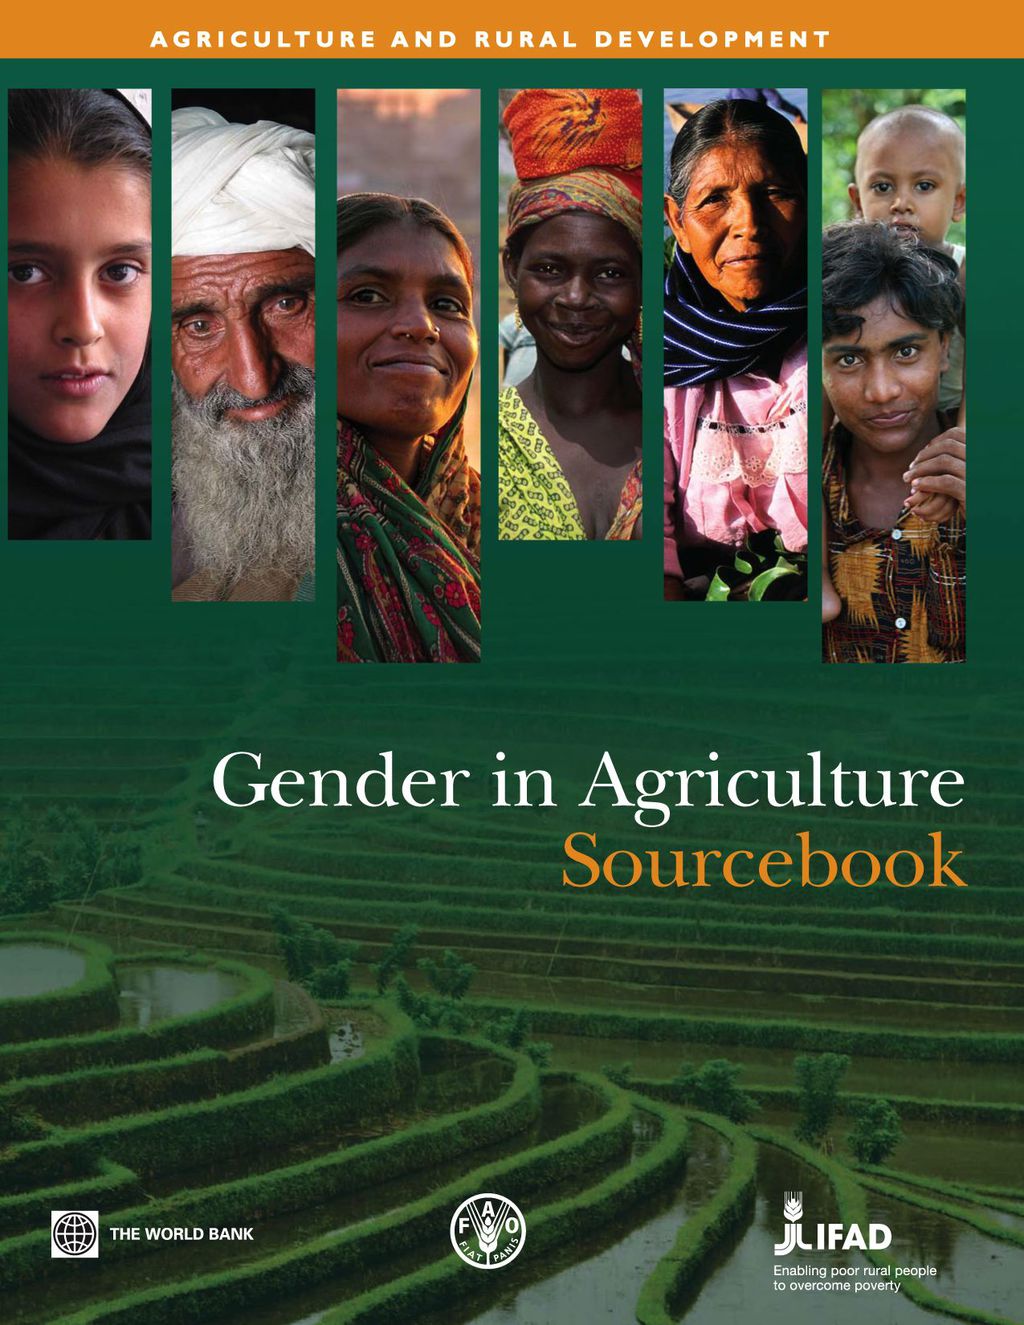 Gender in Agriculture Sourcebook (eBook) - The World Bank; The Food and Agriculture Organization; International Fund for Agricultural Developme,